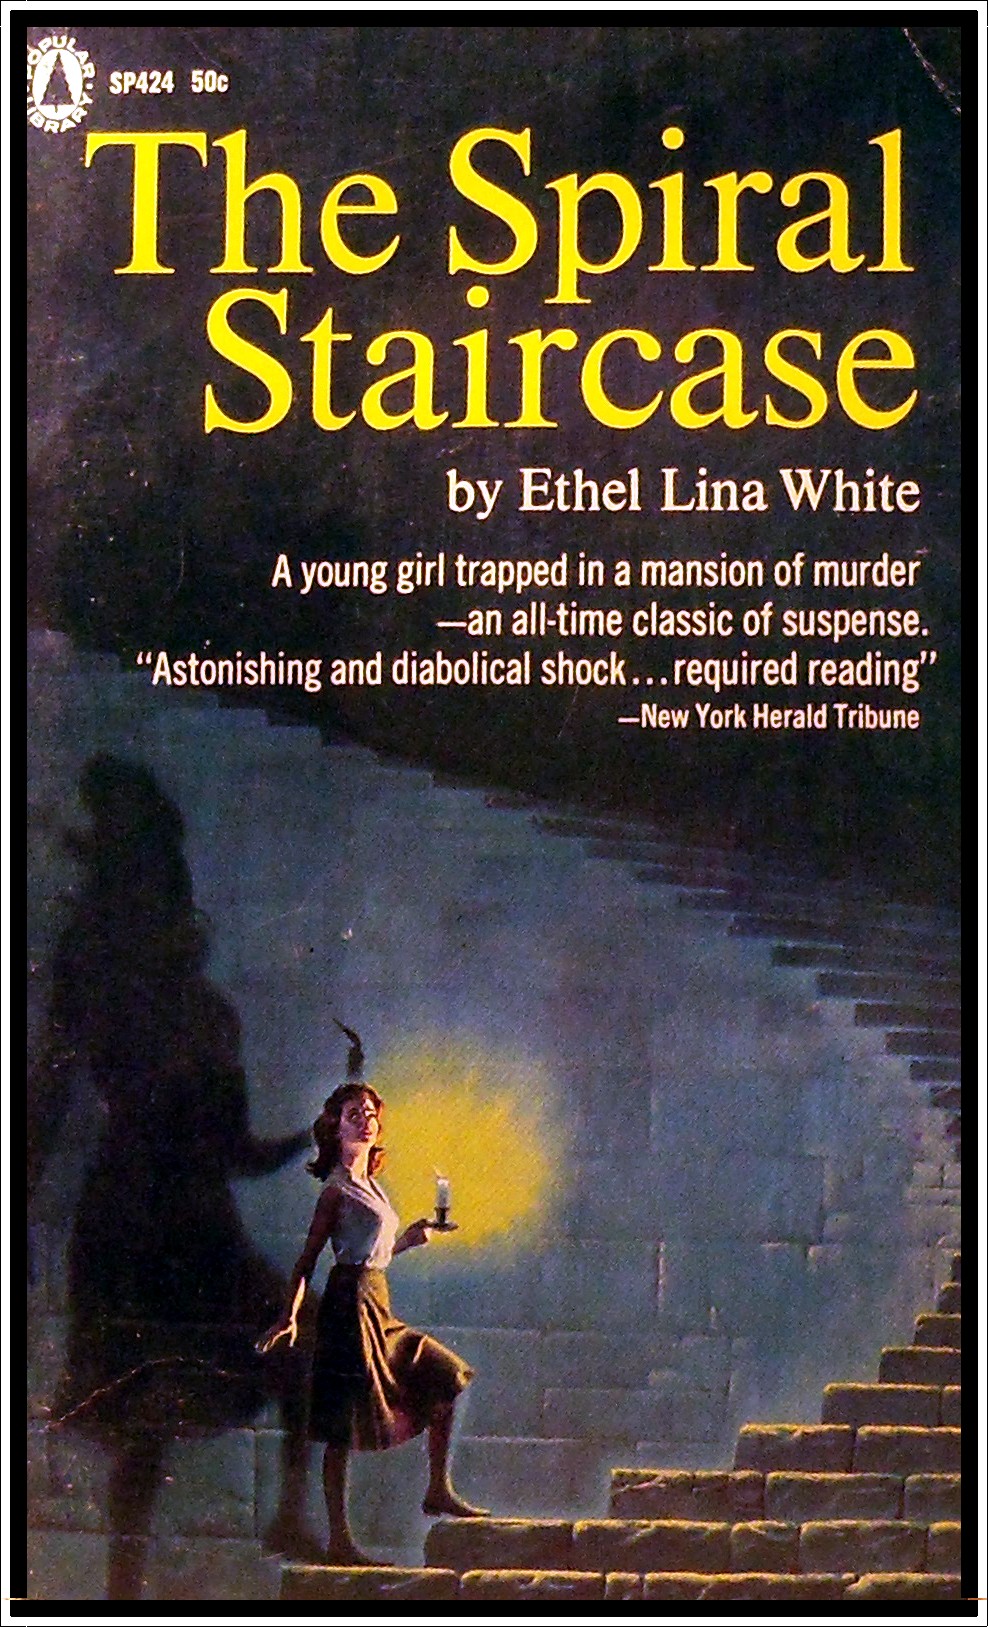 The Spiral Staircase: Some Must Watch Ethel Lina White